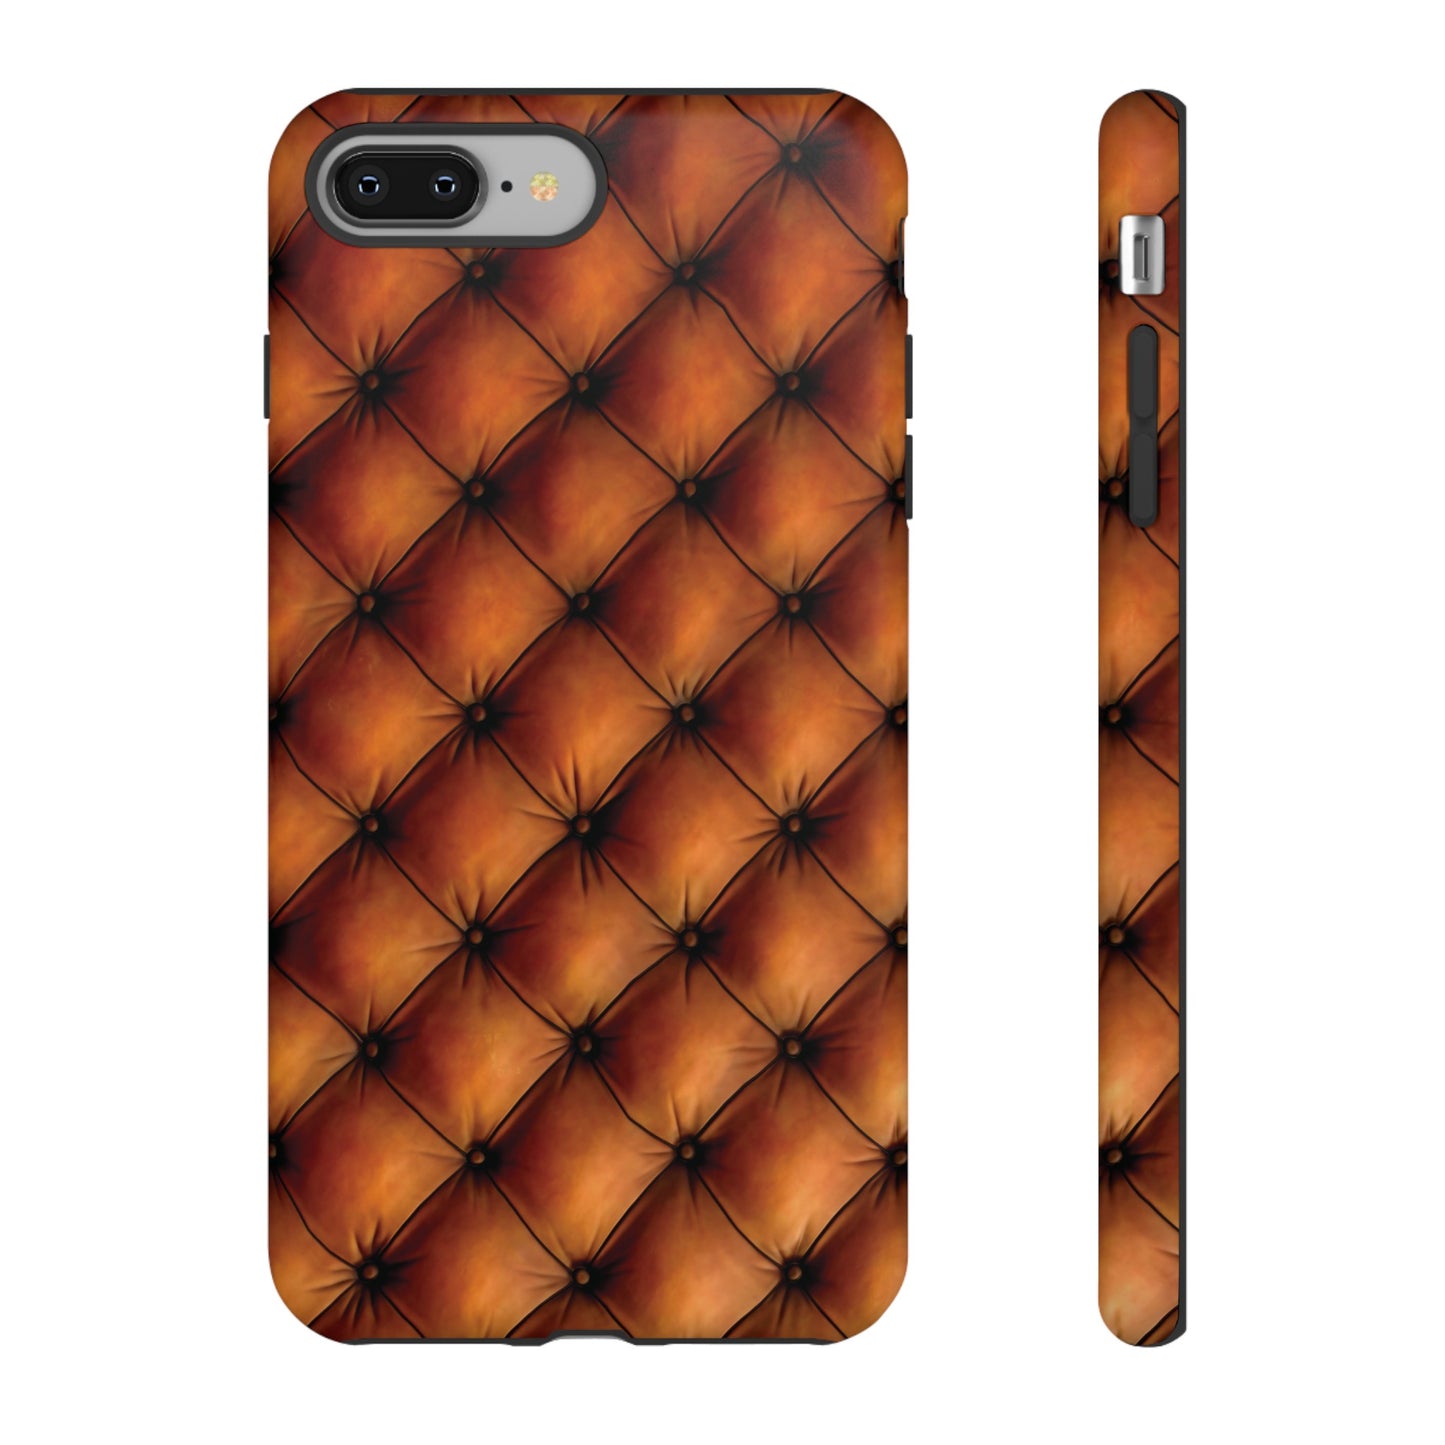 Tufted Leather - Tough Cases